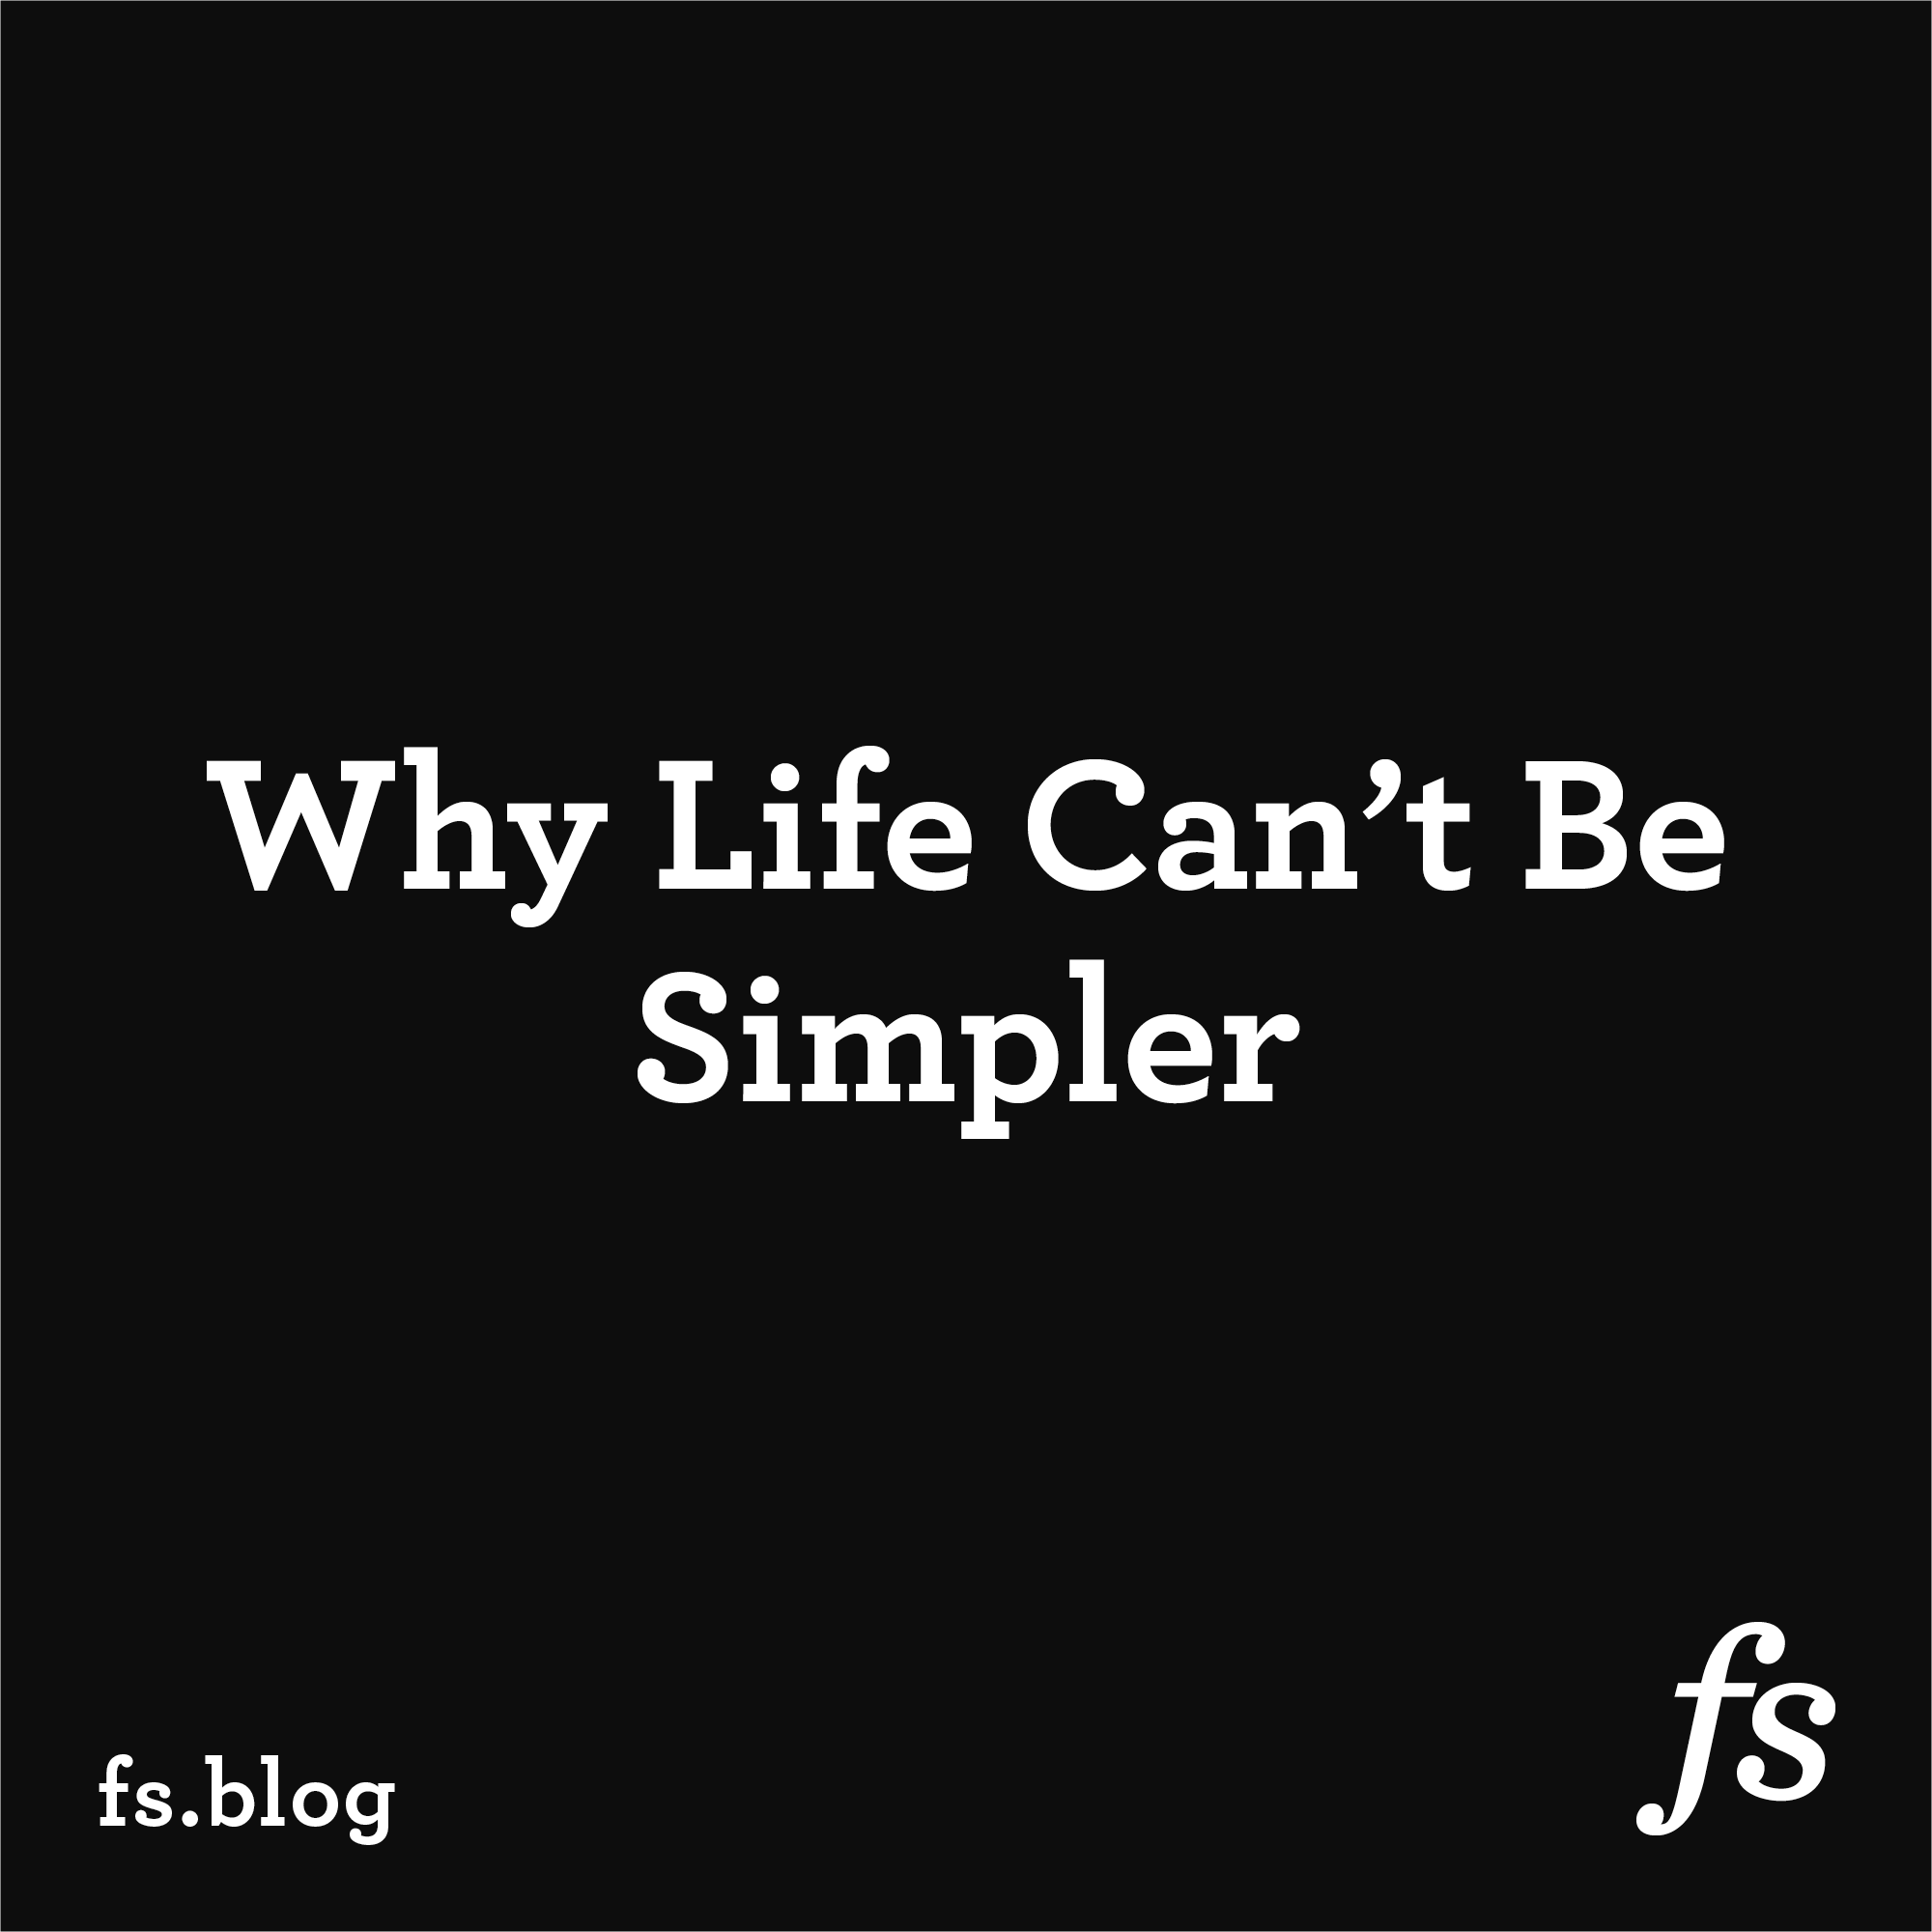 We’d all like life to be simpler. But we also don’t want to sacrifice our options and capabilities. Tesler’s law of the conservation